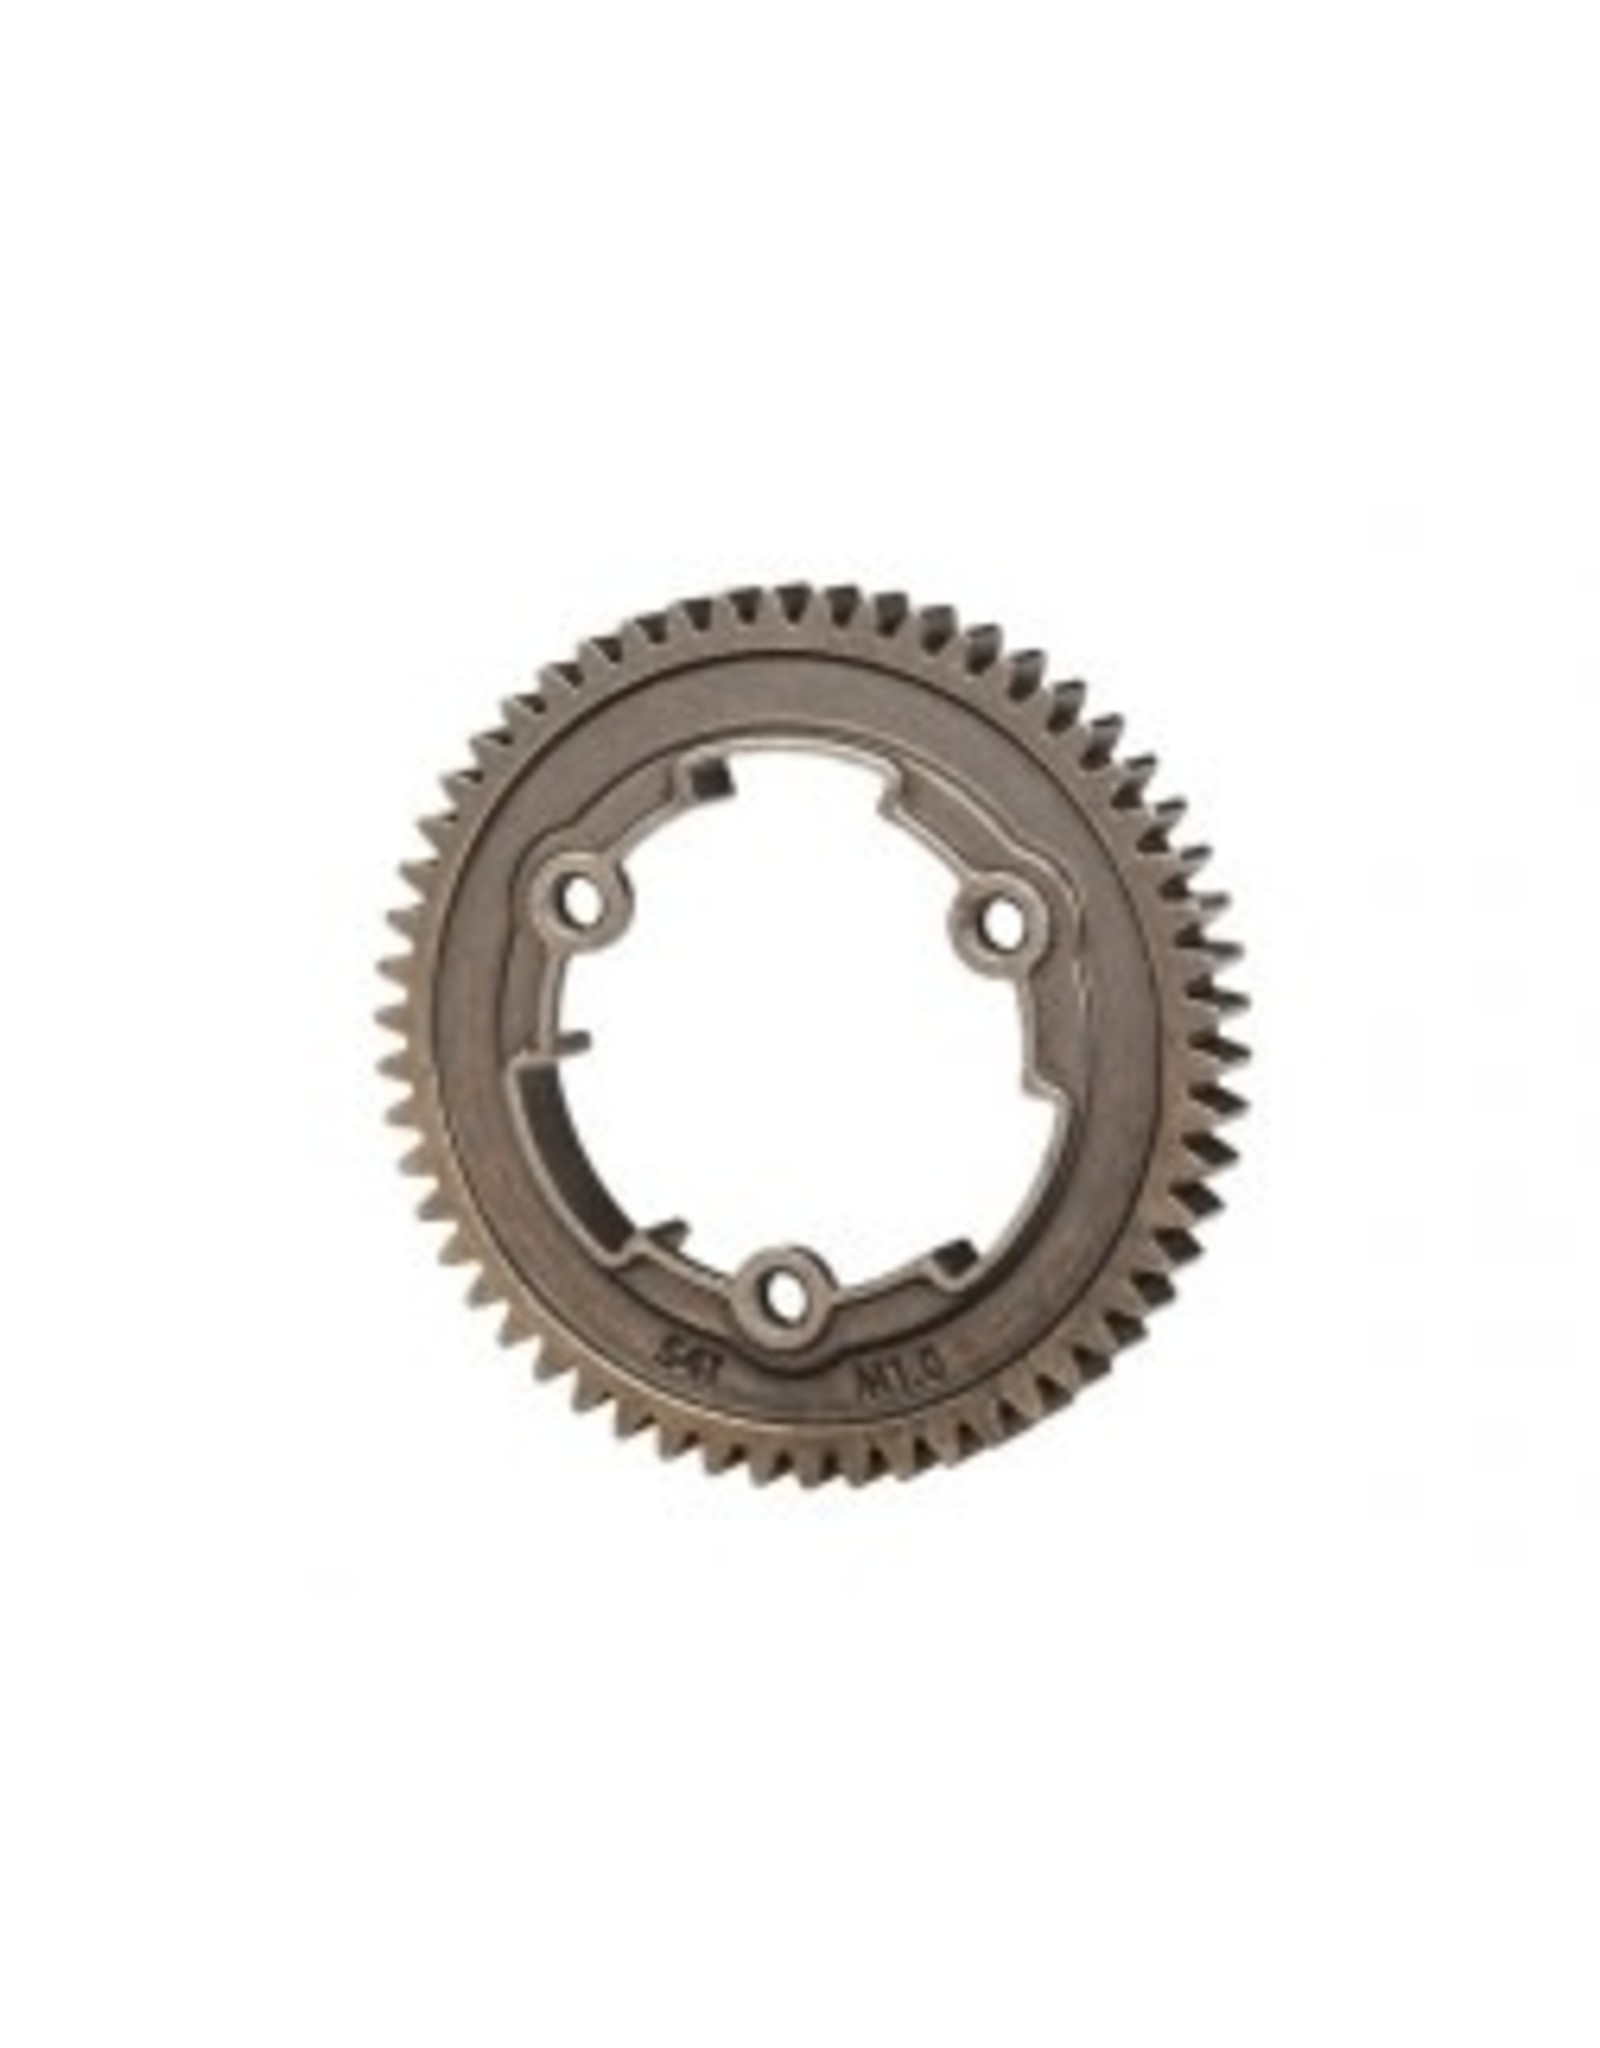 Traxxas [Spur gear, 54-tooth, steel (1.0 metric pitch)] Spur gear, 54-tooth, steel (1.0 metric pitch)